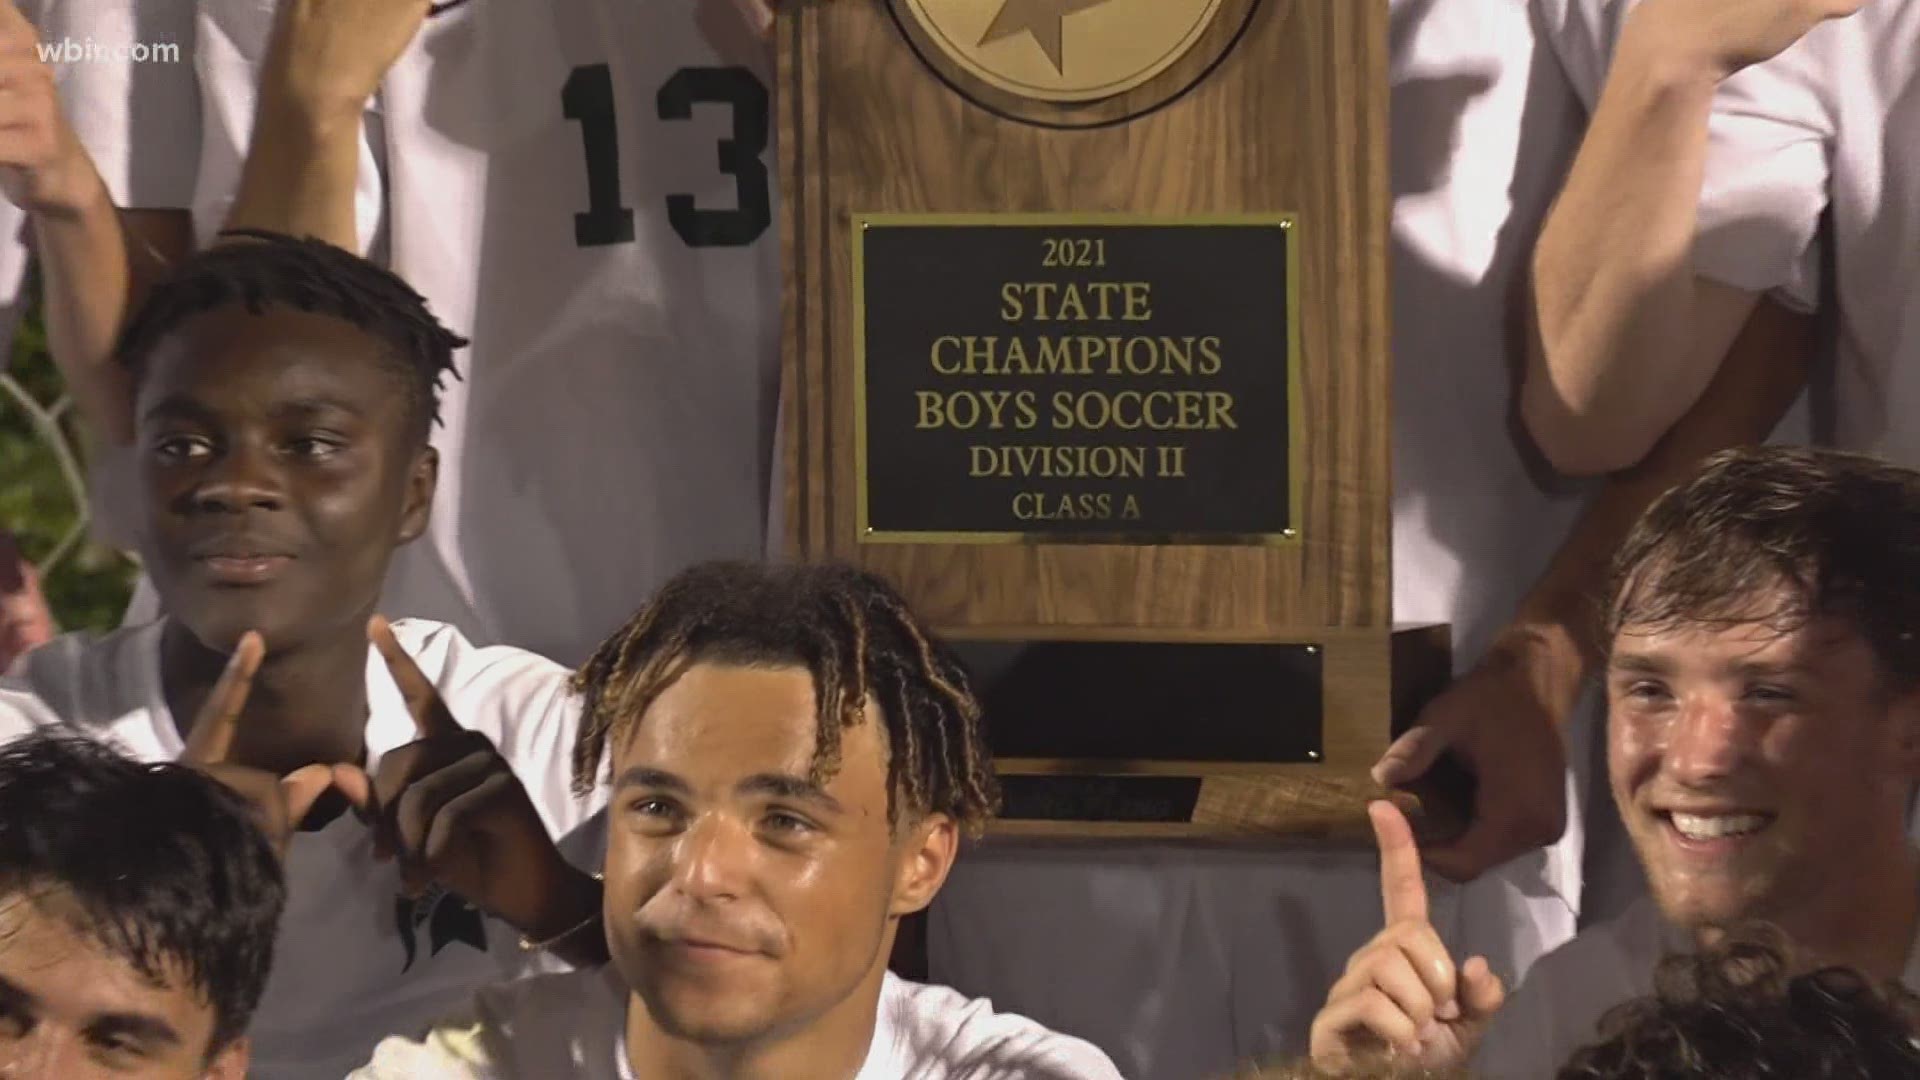 A shovel was seen next to the team's plaque after their coach said they needed to "bury their opponents."